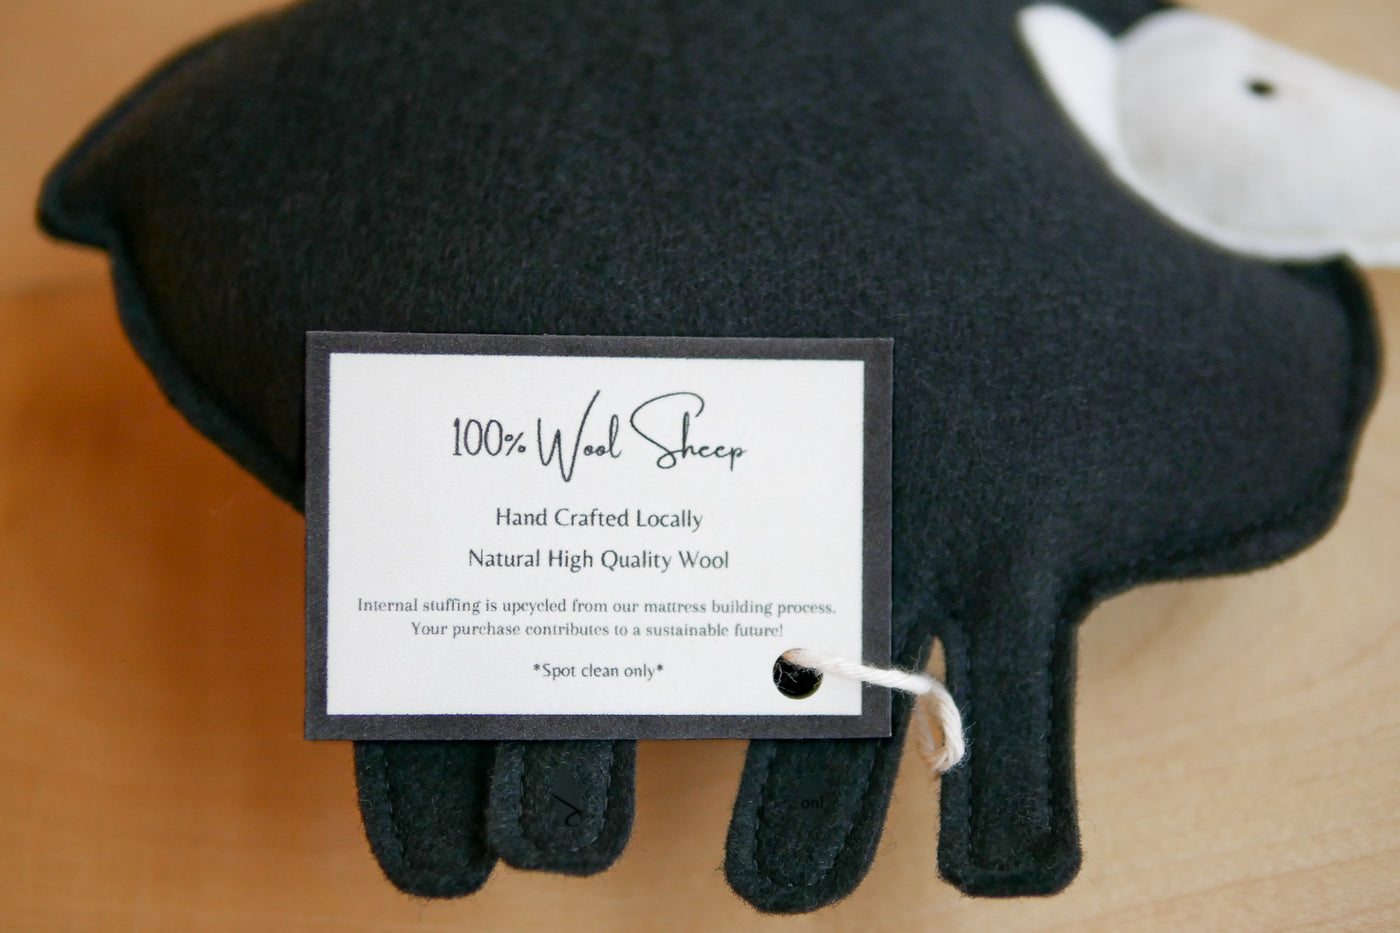 Tag on wool sheep toy that says 100% wool sheep, hand crafted locally, natural high quality wool, internal stuffing is upcycled from our mattress building process. Your purchase contributes to a sustainable future! Spot clean only.